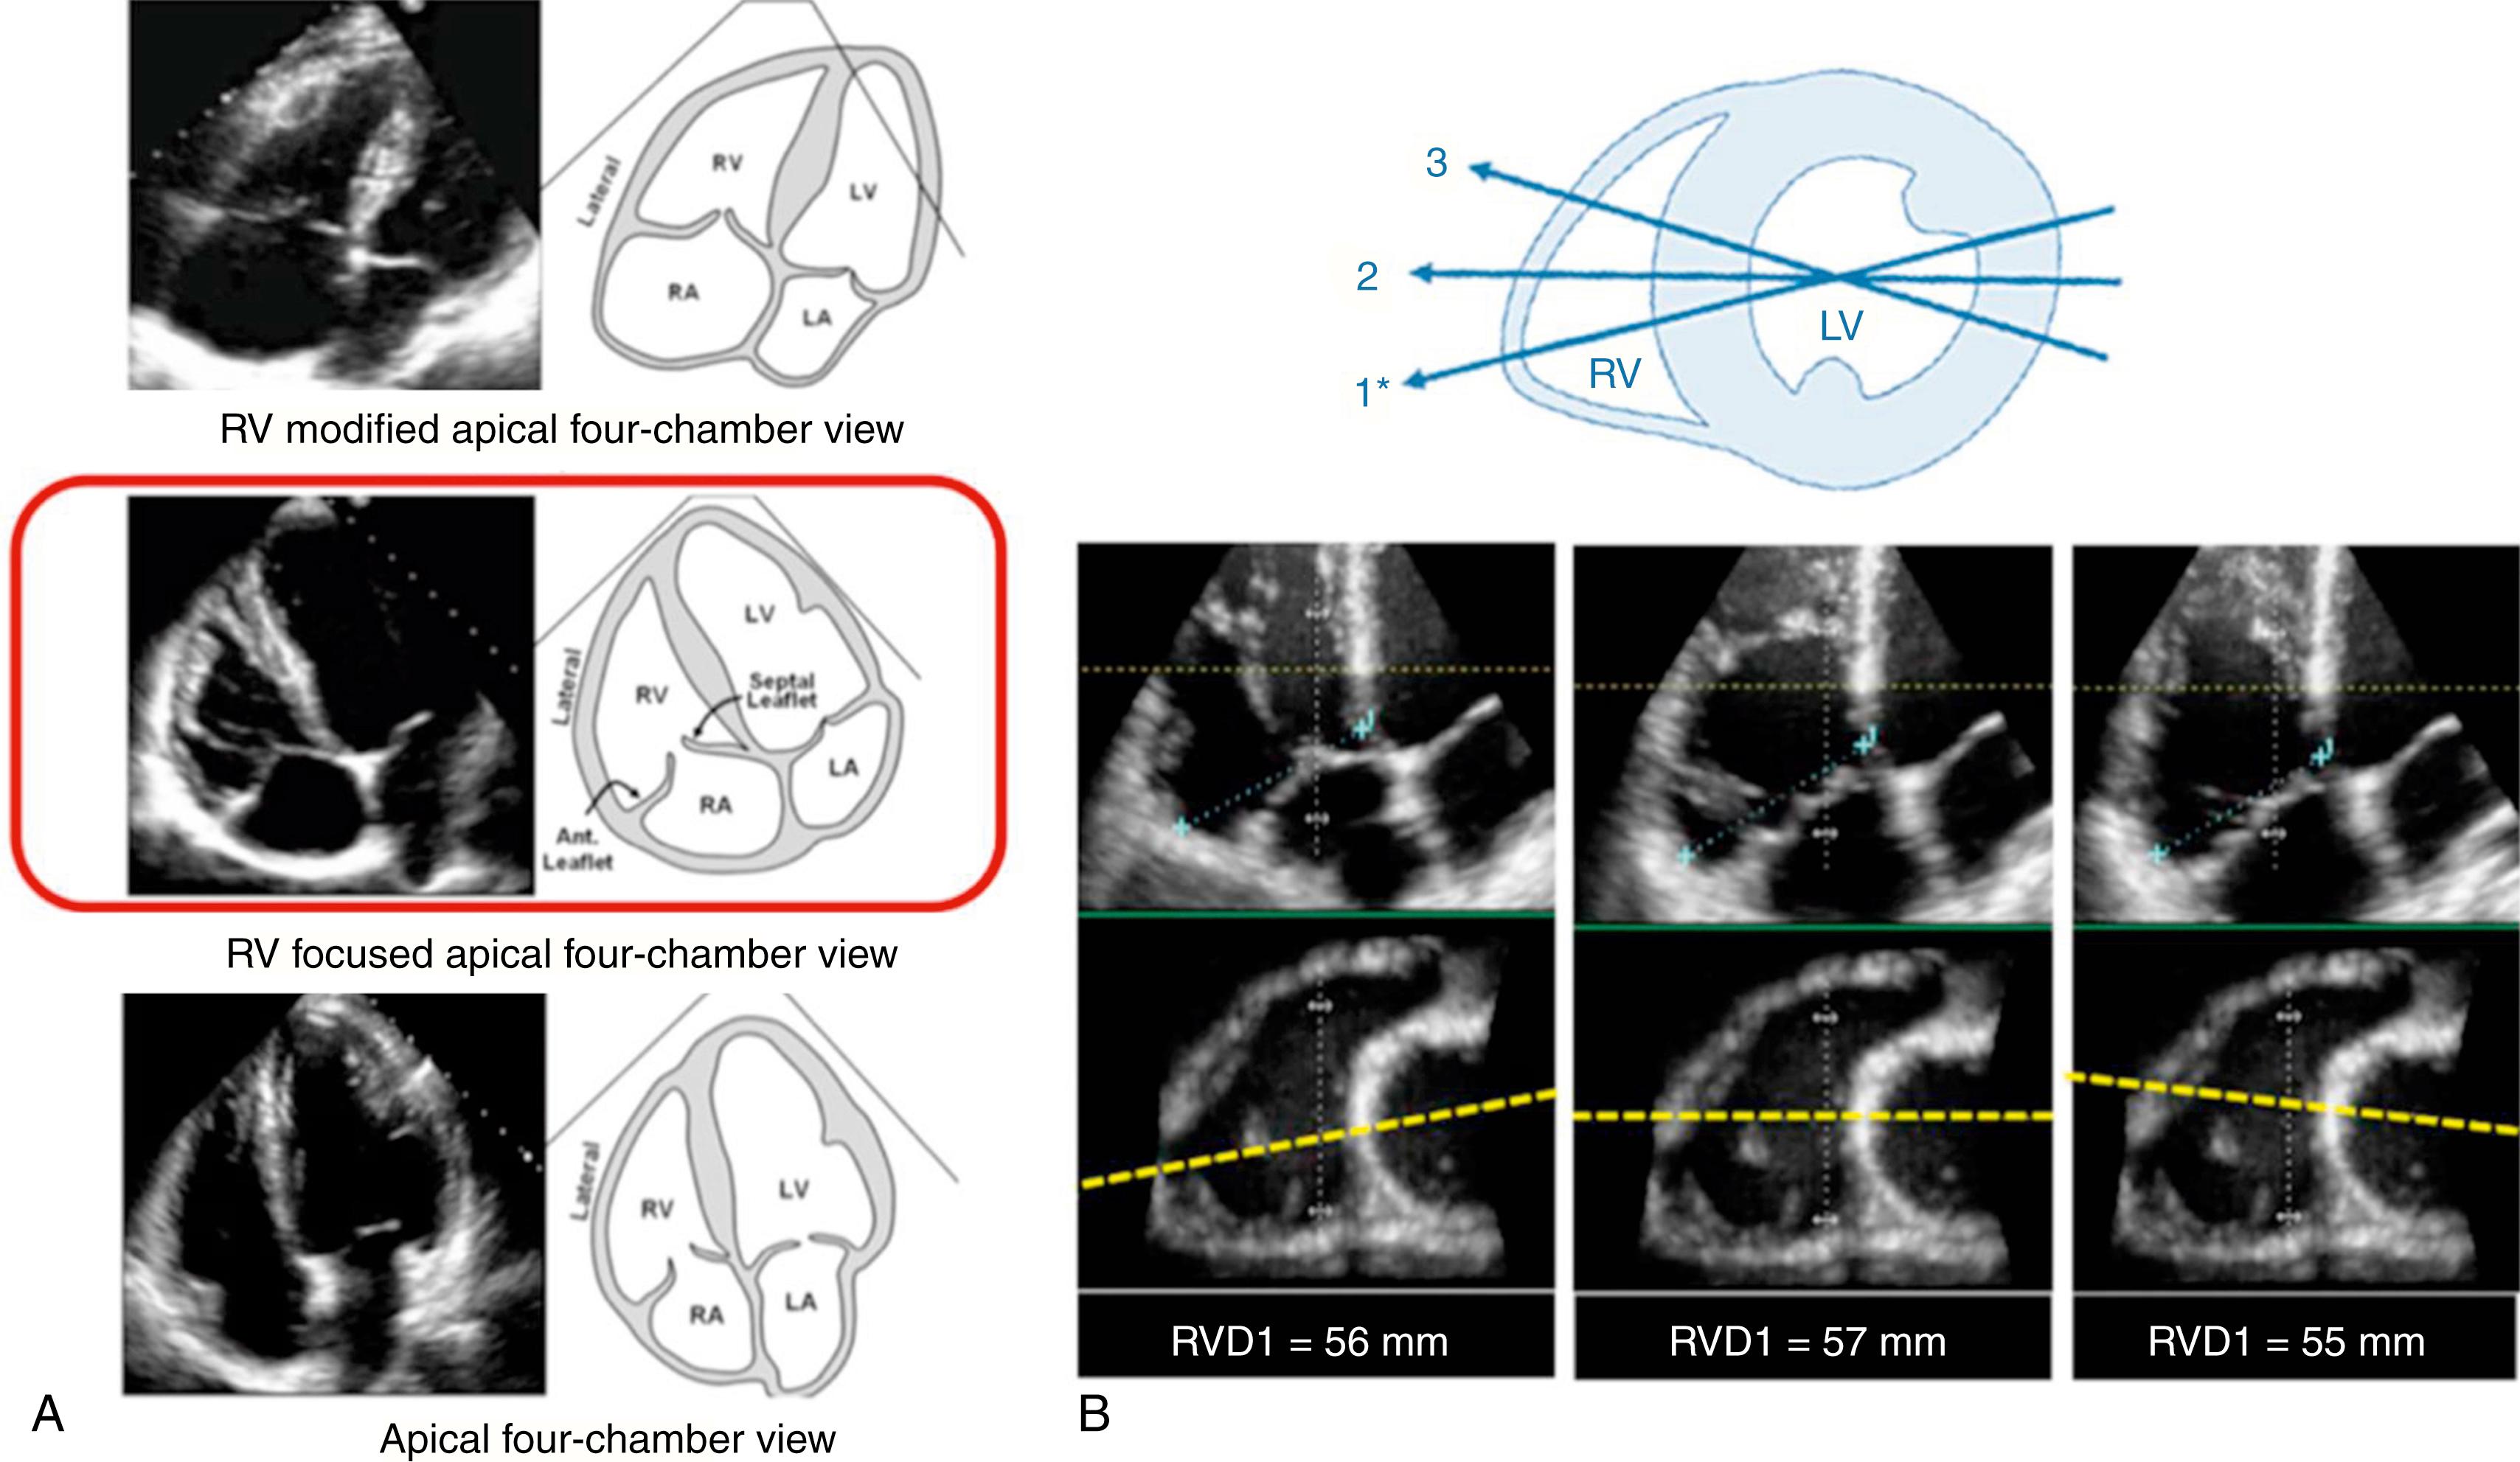 Figure 30.1, A, Three apical views of the right ventricle (RV): the RV-modified, RV-focused, and standard apical four-chamber views. B, The rationale for using the RV-focused view in ensuring the maximal dimension by demonstrating the relationship between rotation of the transducer and the RV measurement. LA, Left atrium; LV, left ventricle, RA, right atrium; RVD1, basal RV dimension.